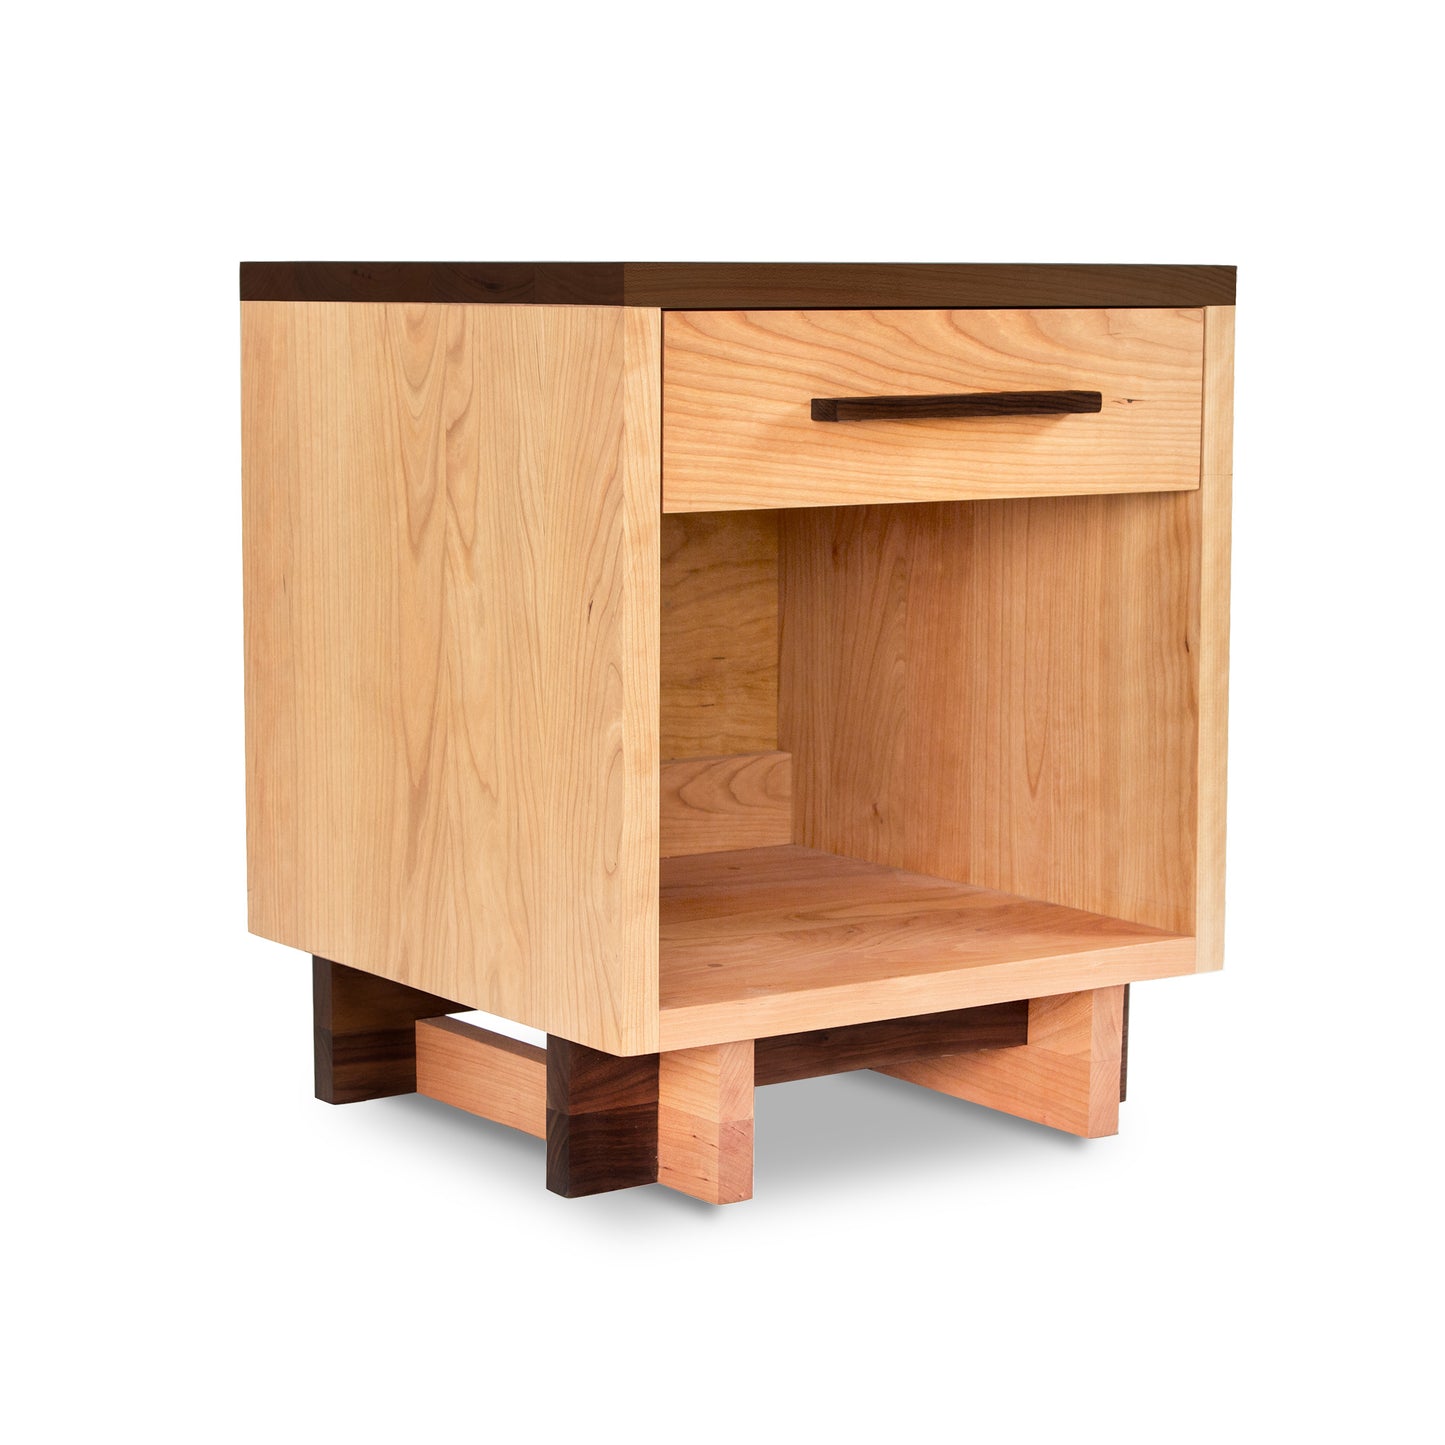 A Modern American 1-Drawer Enclosed Shelf Nightstand, handmade by Vermont Furniture Designs, with a drawer on top.